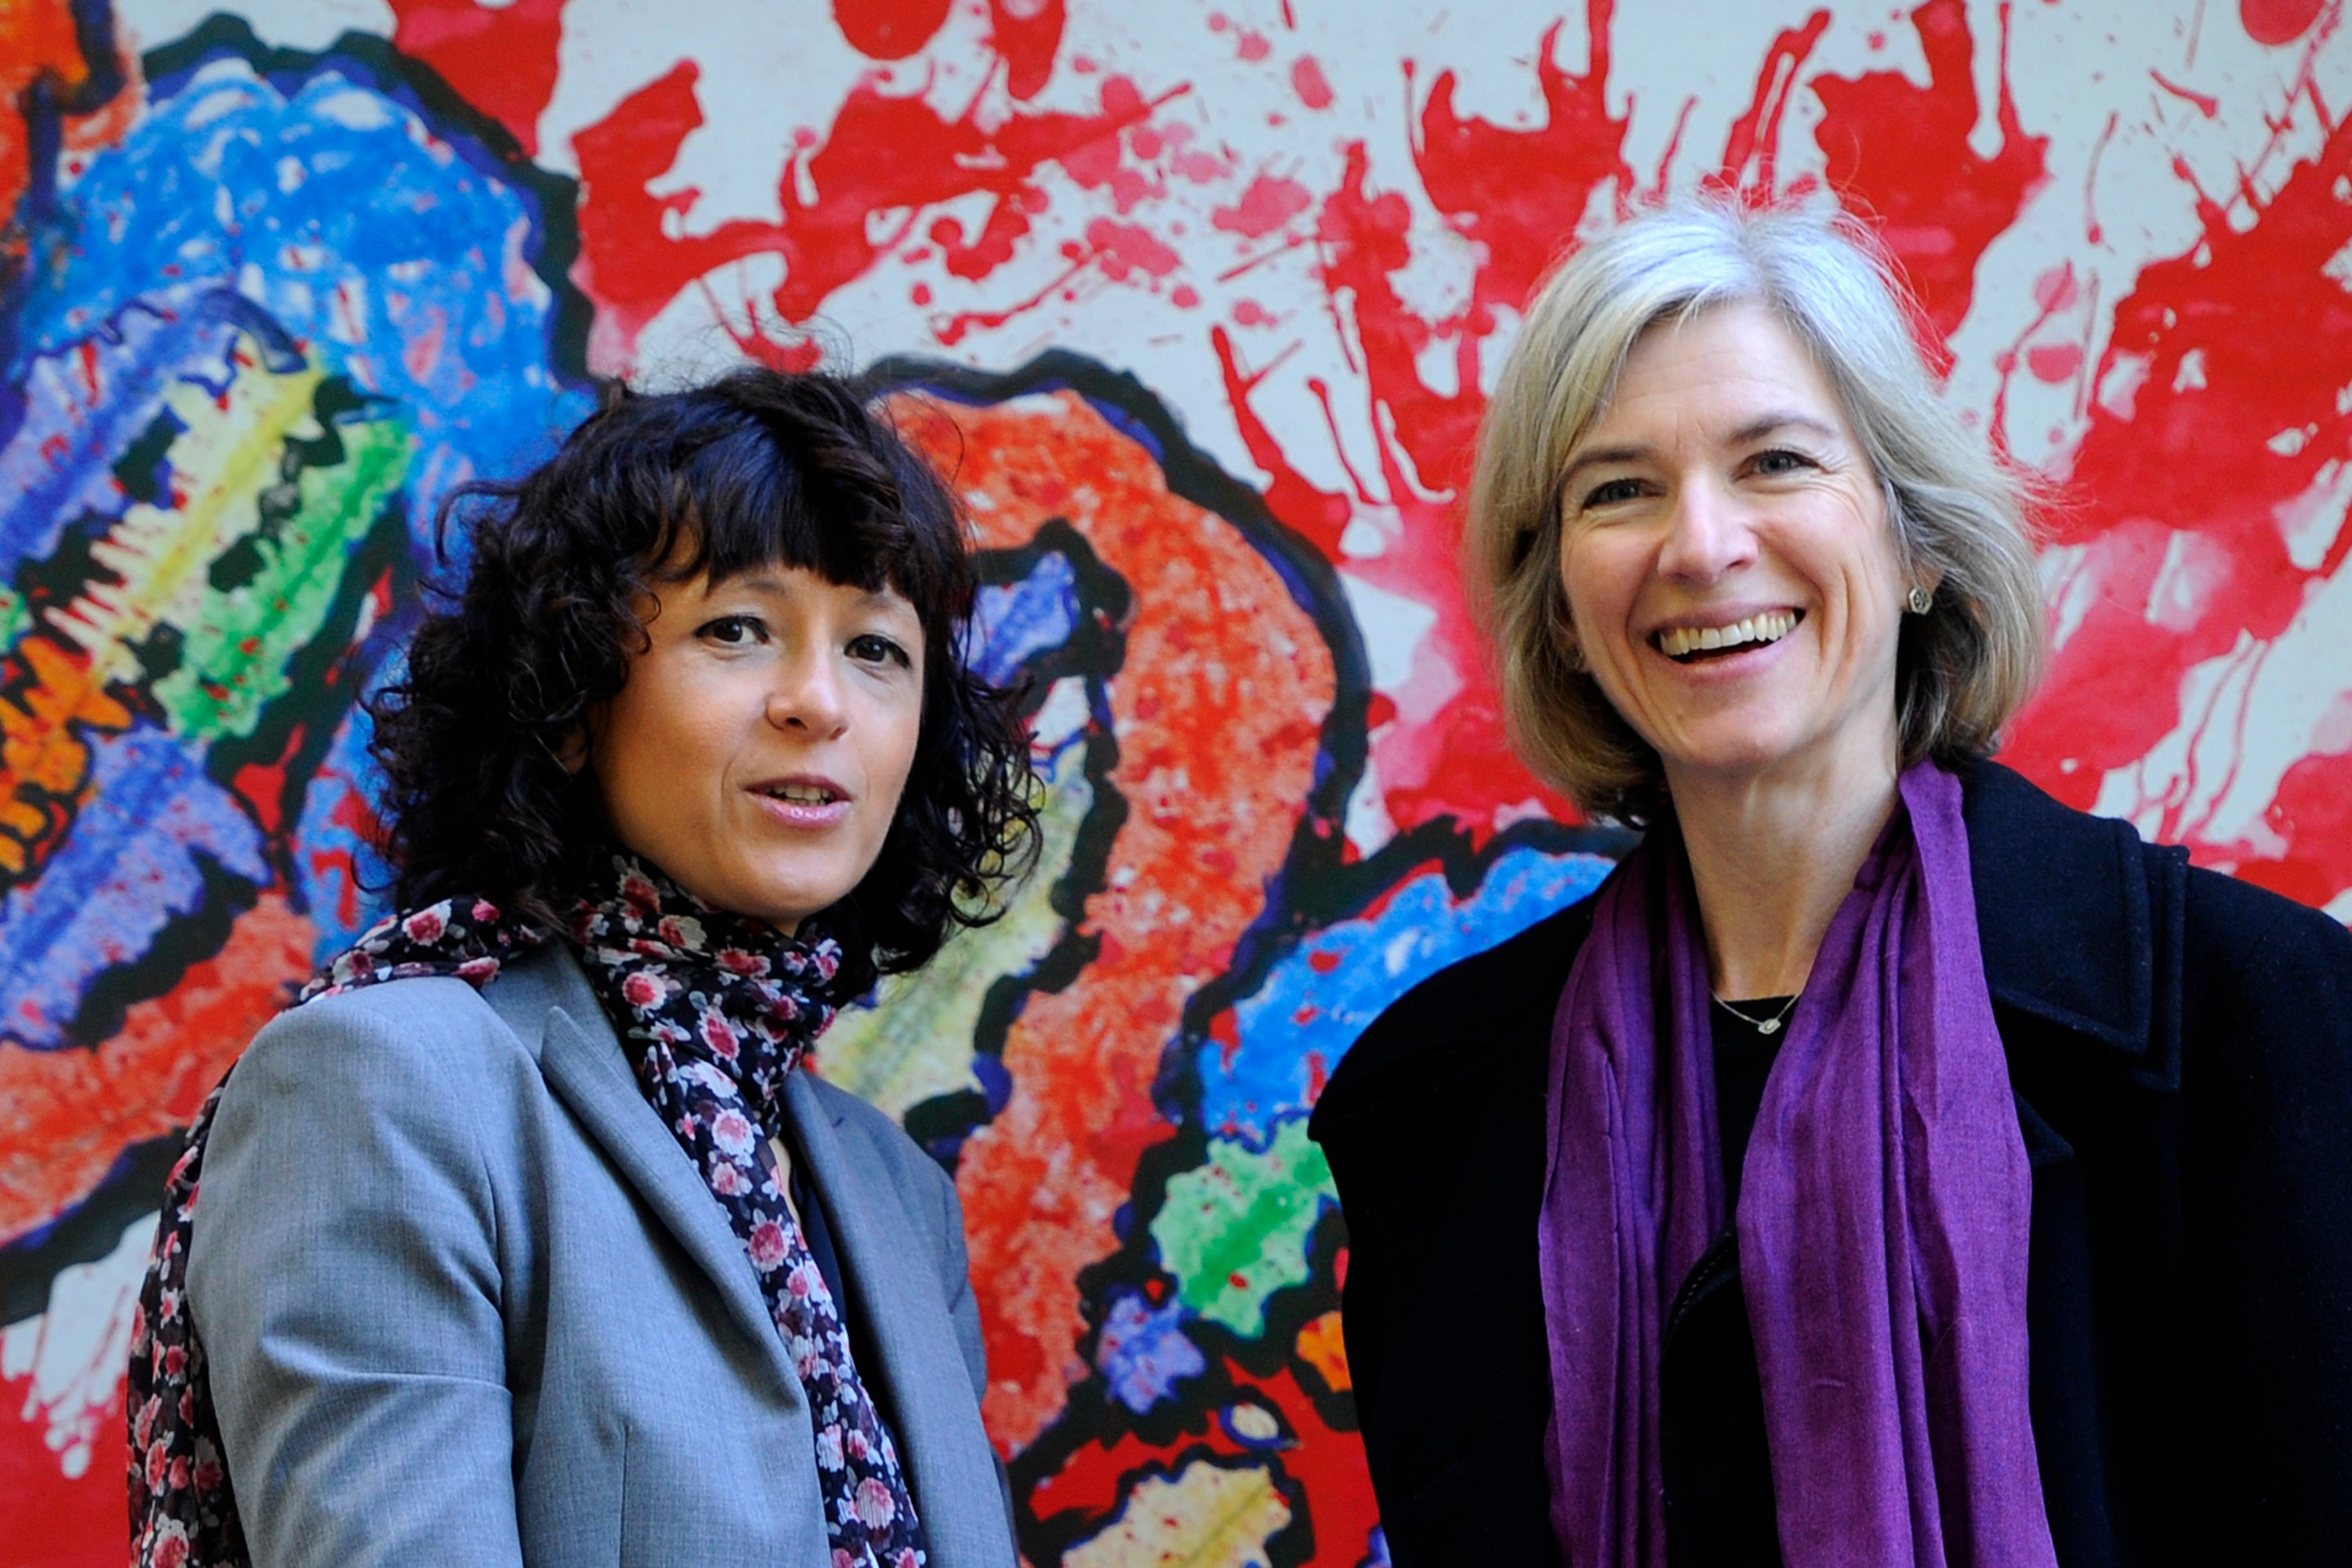 French researcher in Microbiology, Genetics and Biochemistry Emmanuelle Charpentier (L) and US professor of Chemistry and of Molecular and Cell Biology, Jennifer Doudna pose beside a painting made by children of the genome at the San Francisco park in Oviedo, on October 21, 2015.